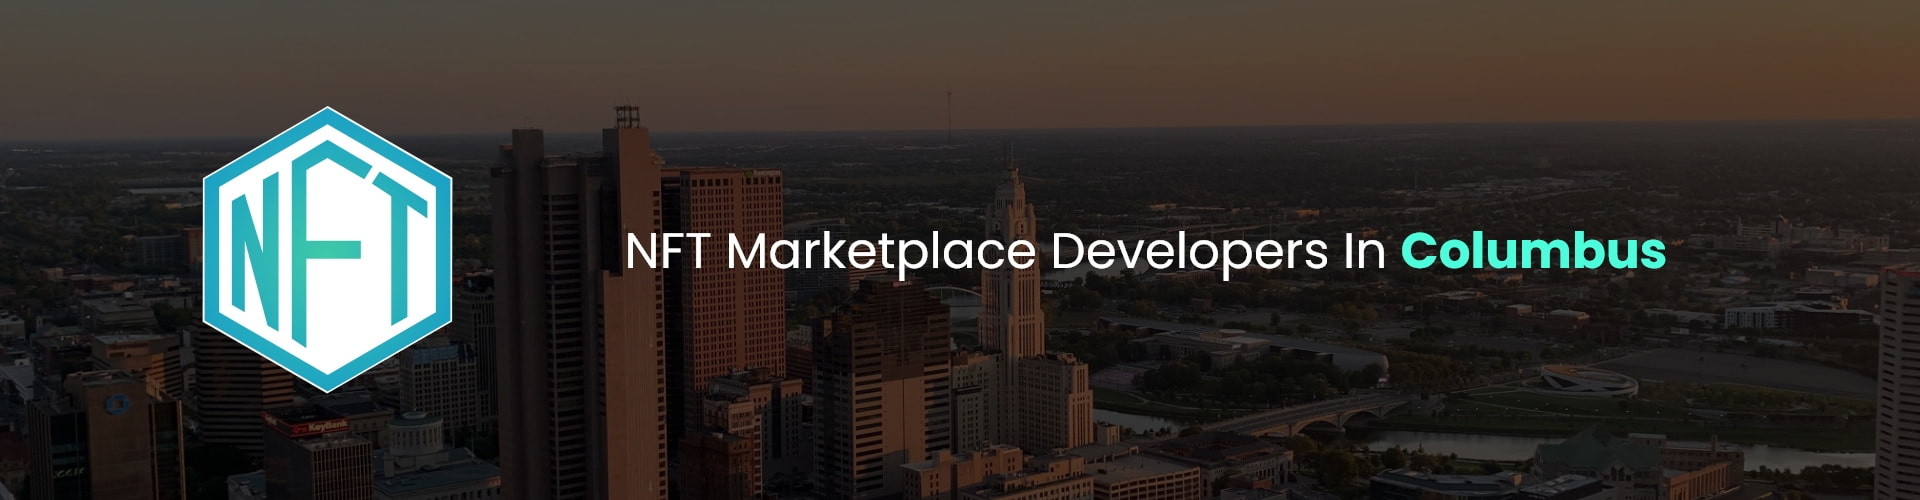 hire nft marketplace developers in columbus